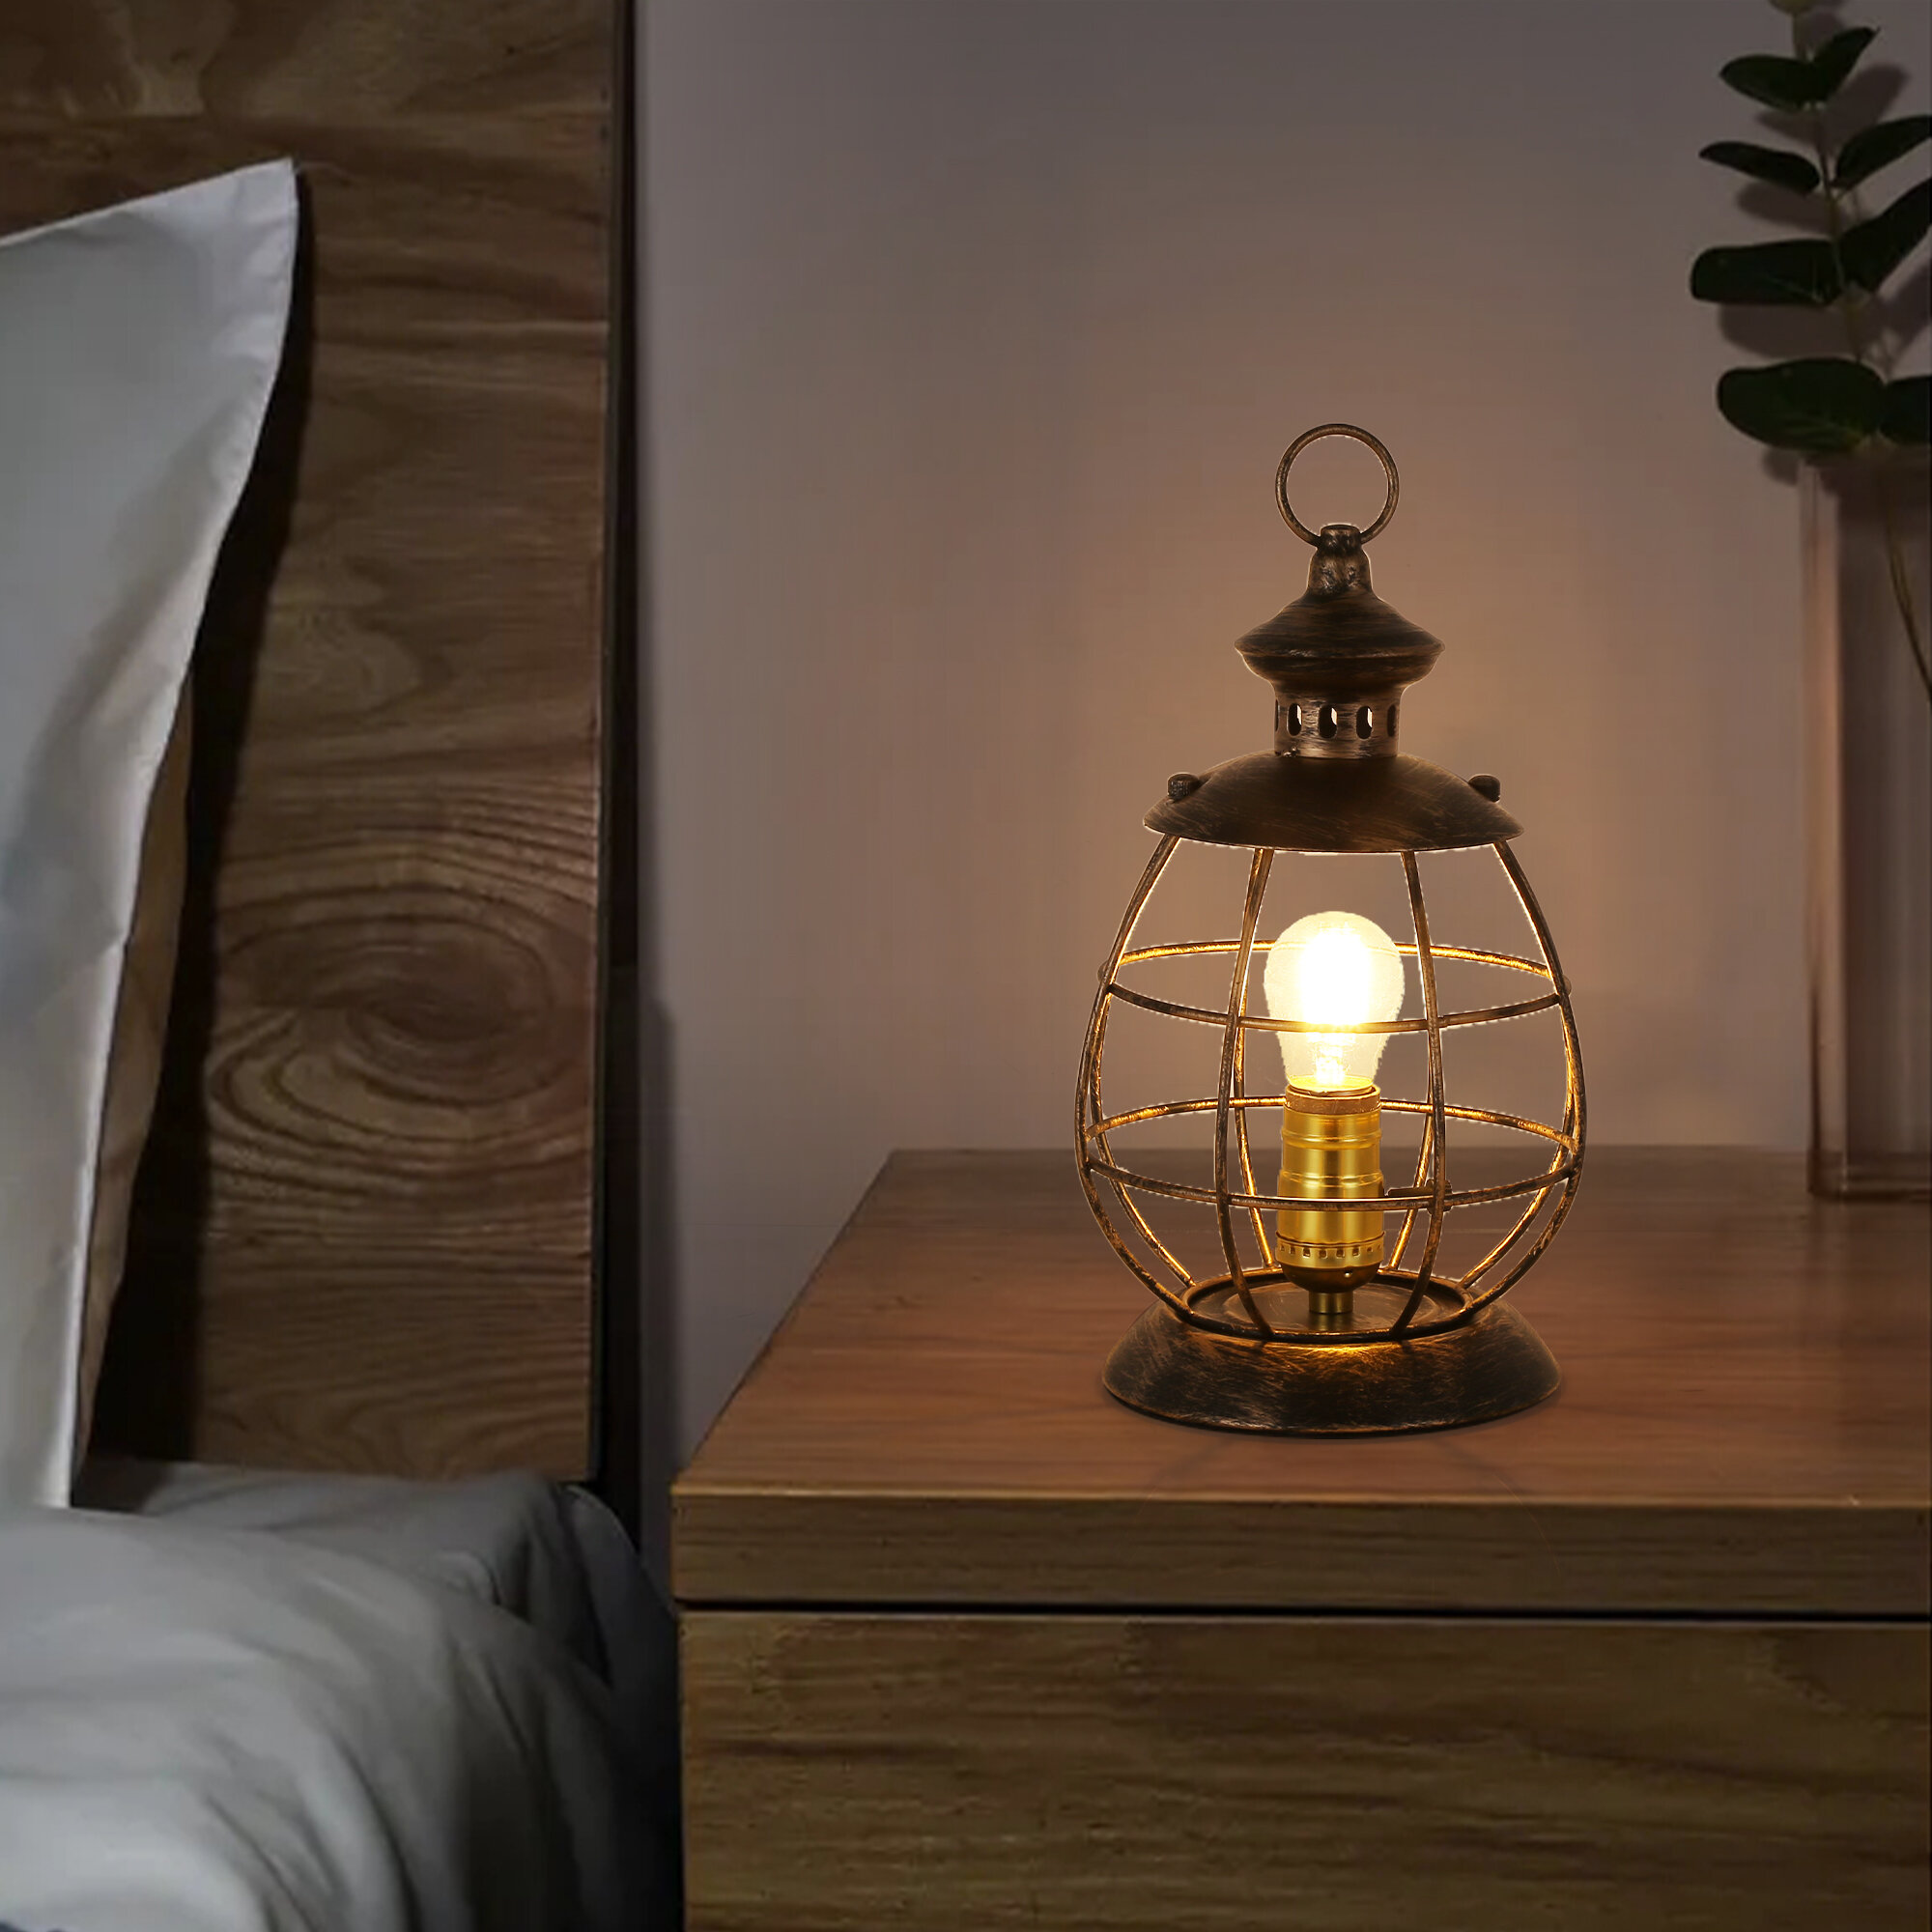 Electric Lantern Table Lamp for Bedrooms to Give You The Perfect Farmhouse Look